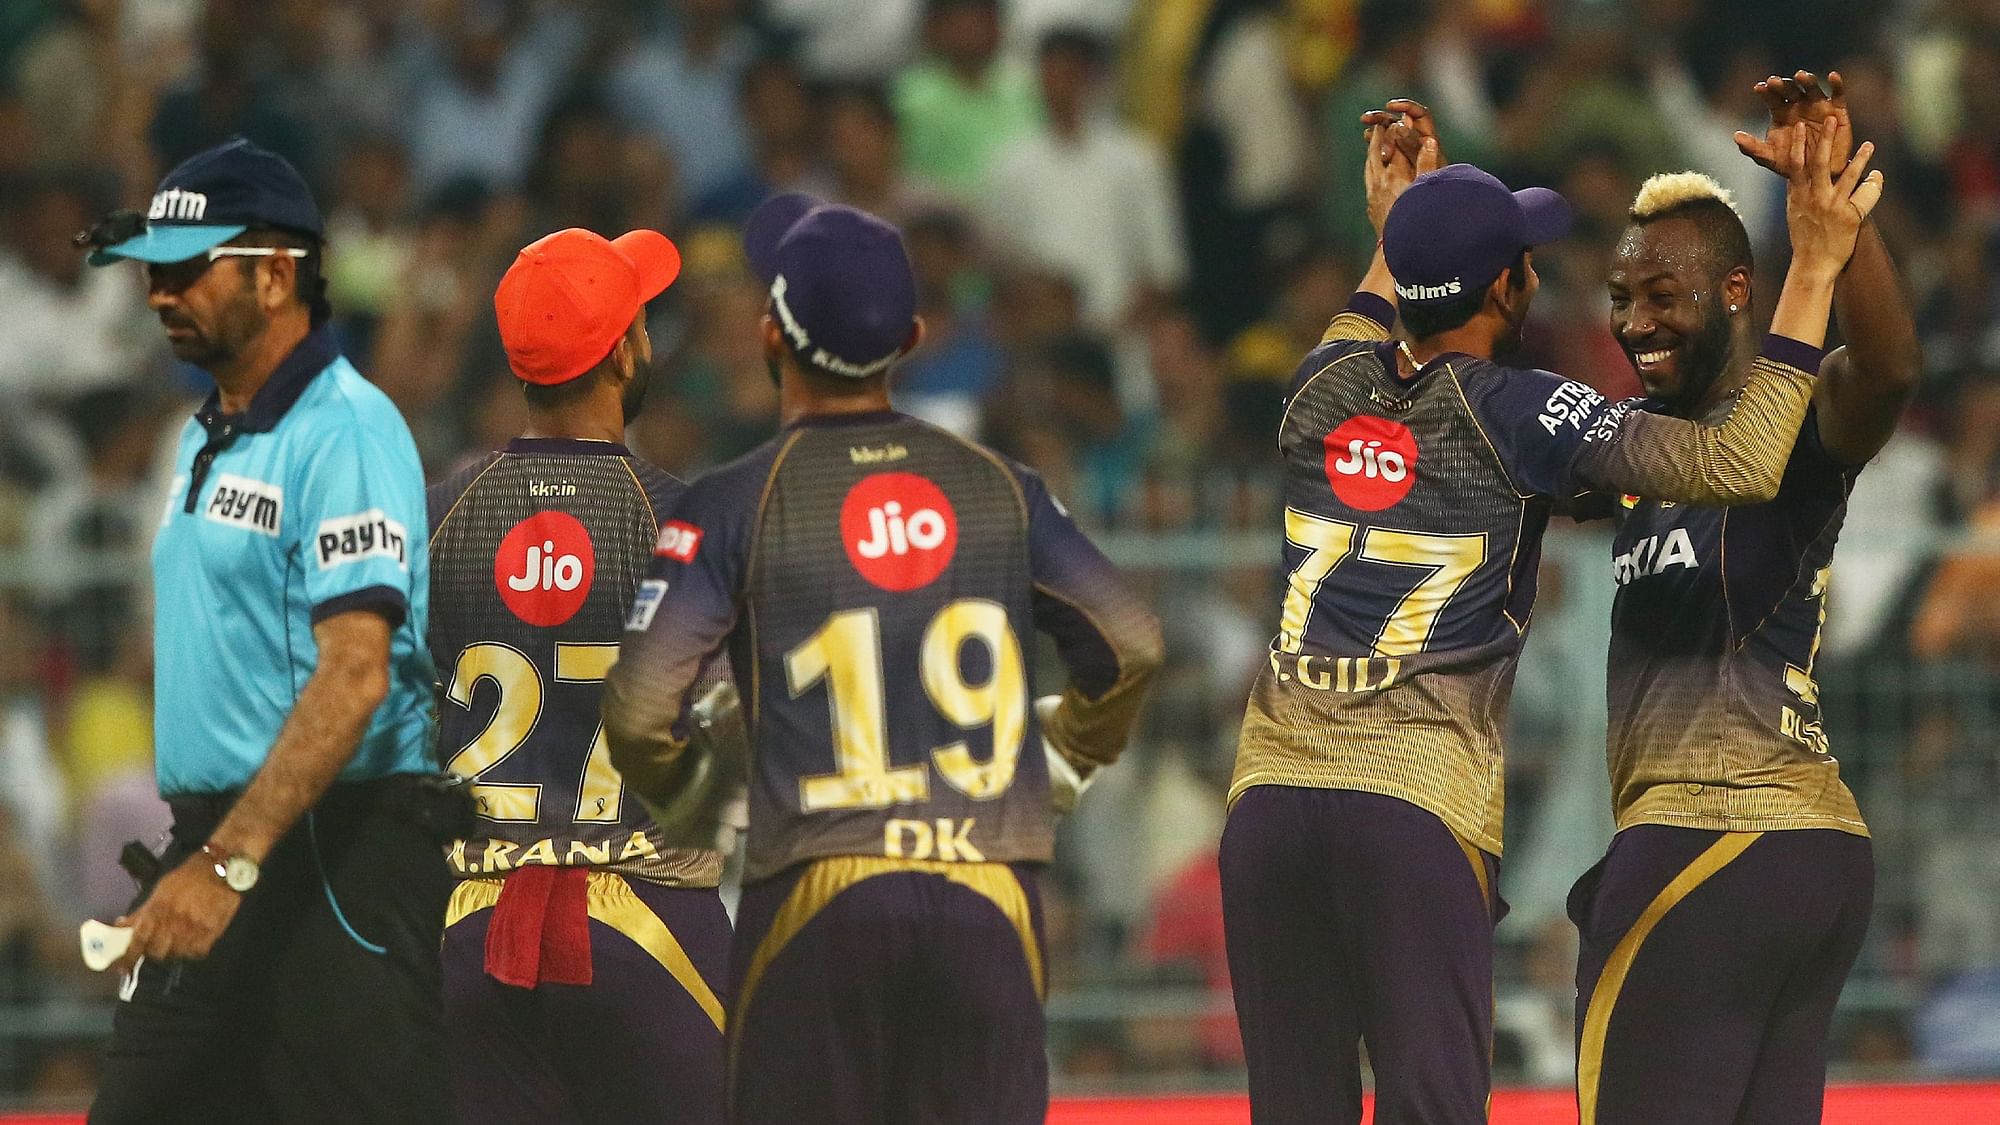 With the win against Kings XI Punjab, Kolkata are now at the top of the table.